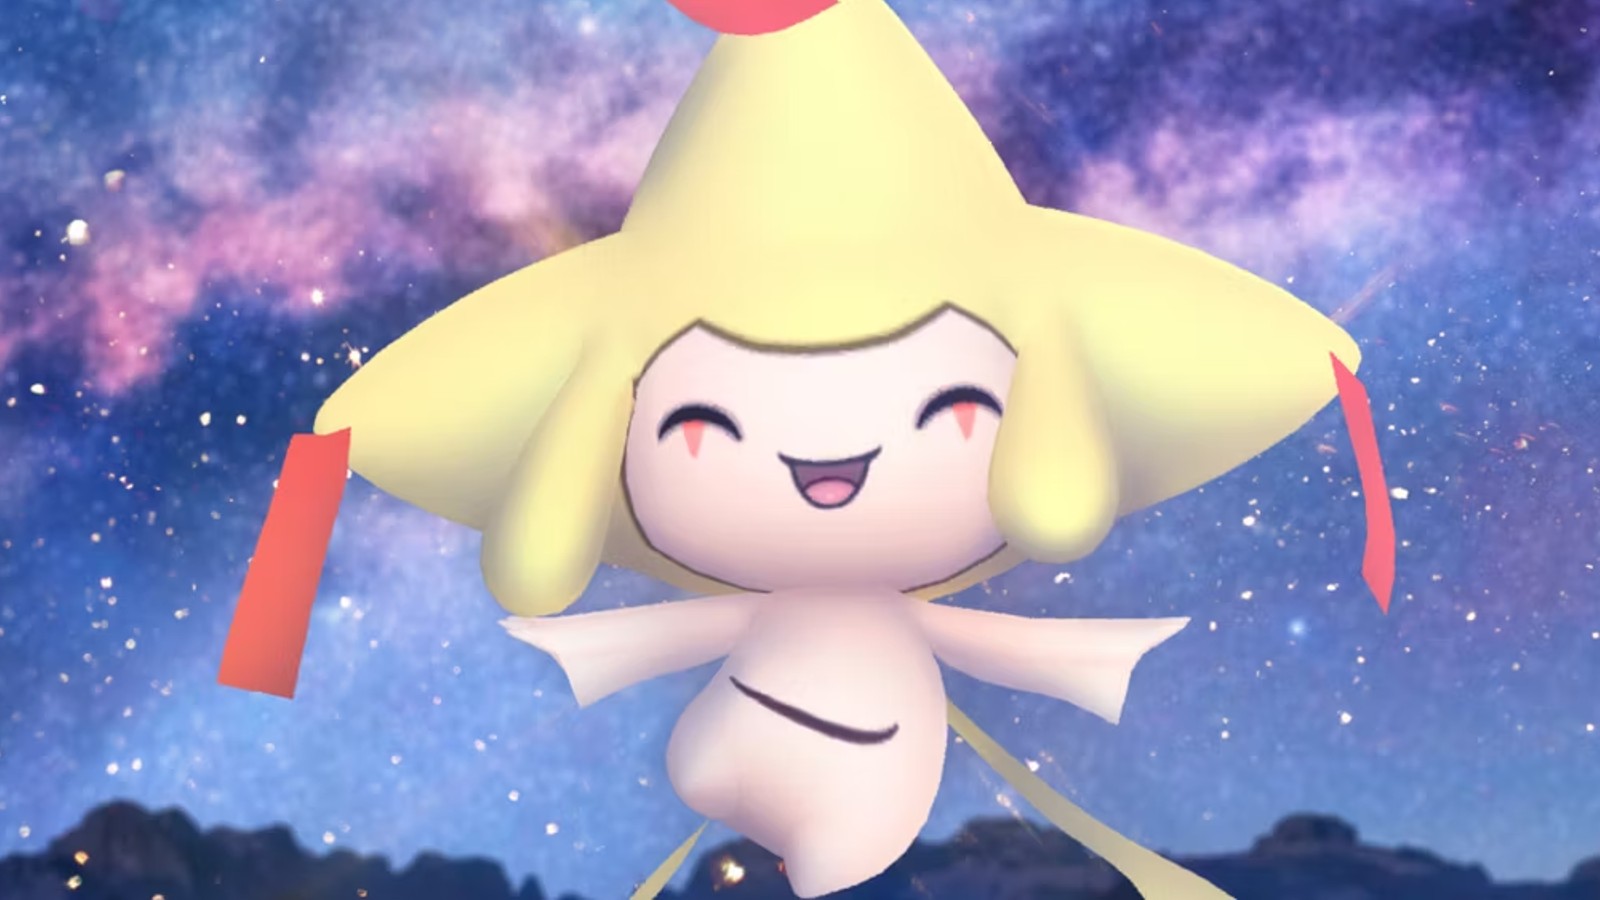 Unlucky Pokemon Go player grinds whole year for sub-par shiny Jirachi